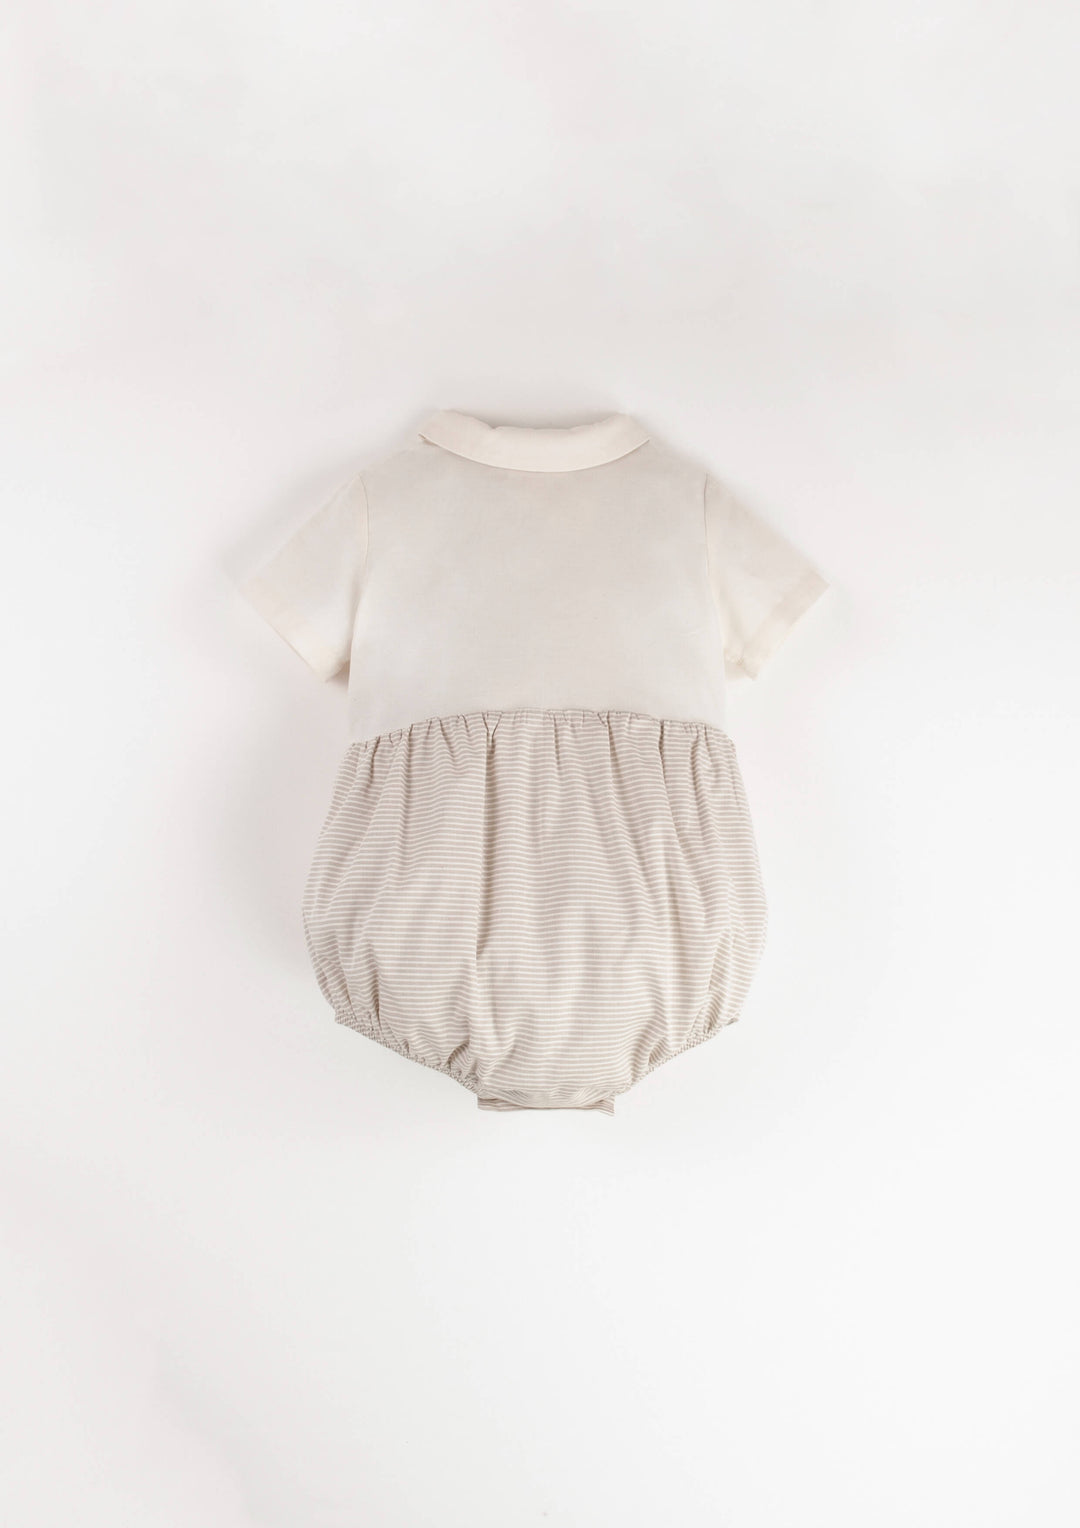 Mod.15.3 Off-white contrasting romper suit